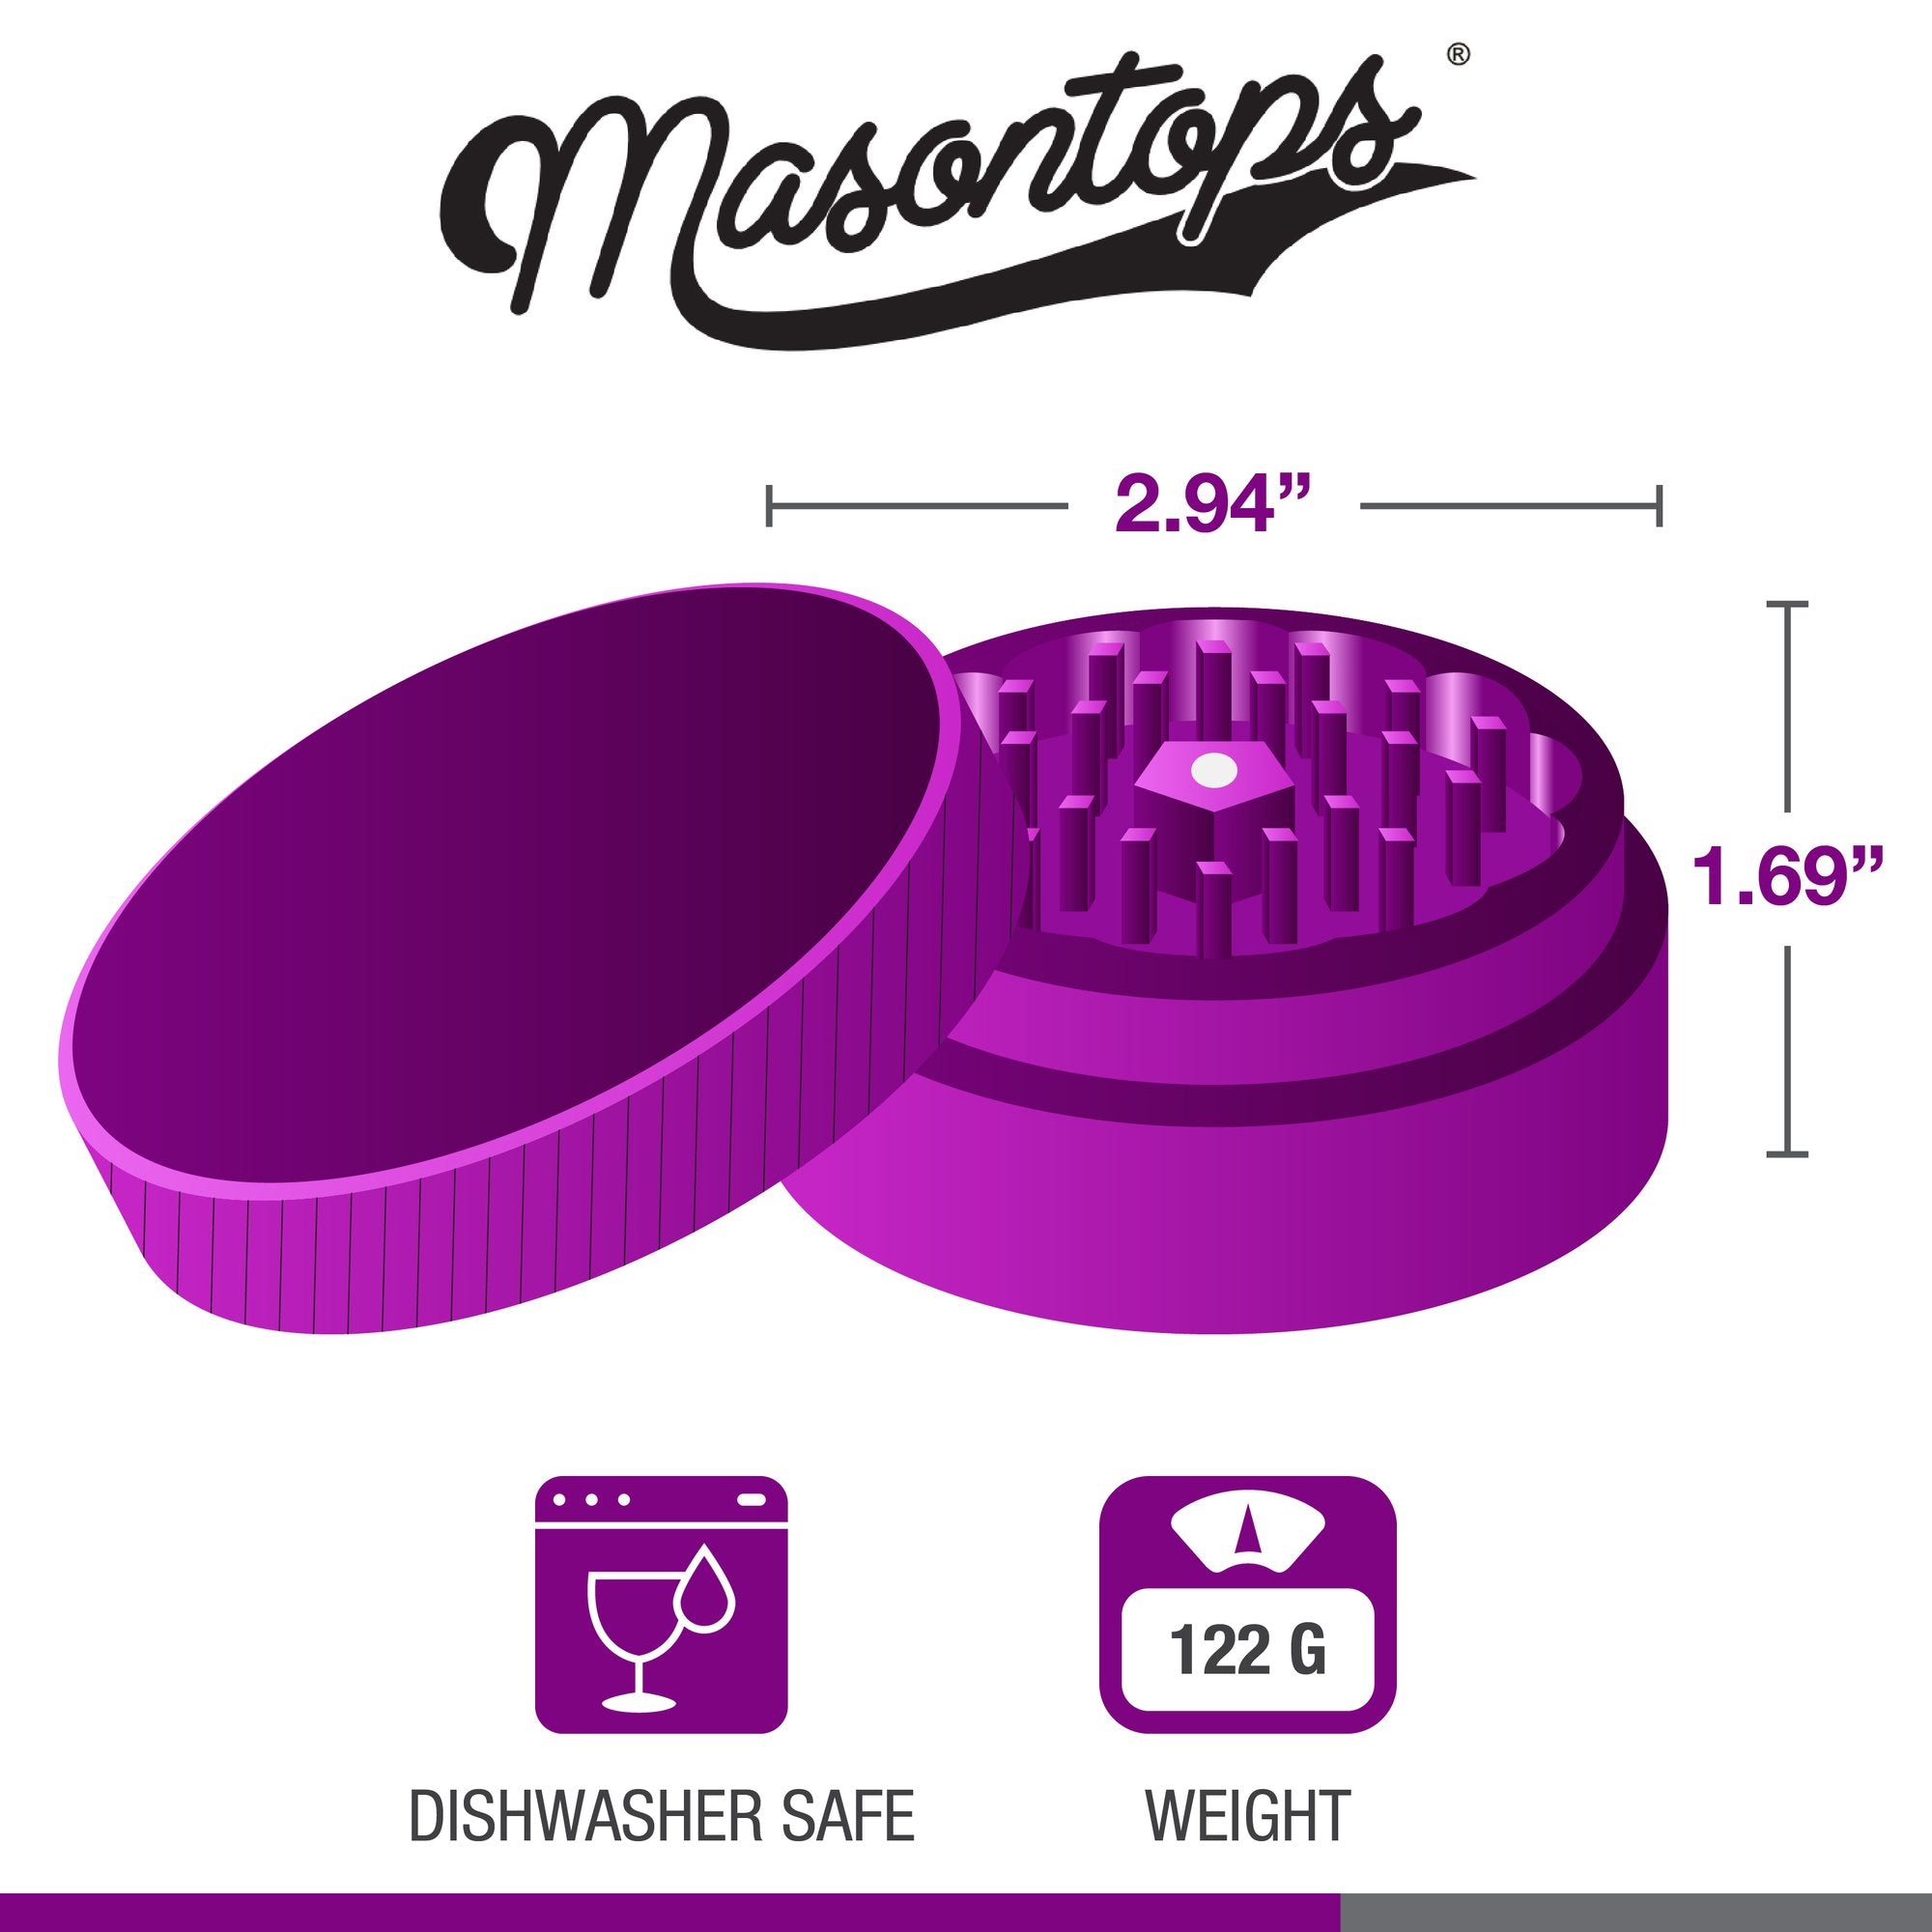 Masontops - 2-in-1 Herb Grinder all things being eco chilliwack mason jar accessories grinder for marijuana